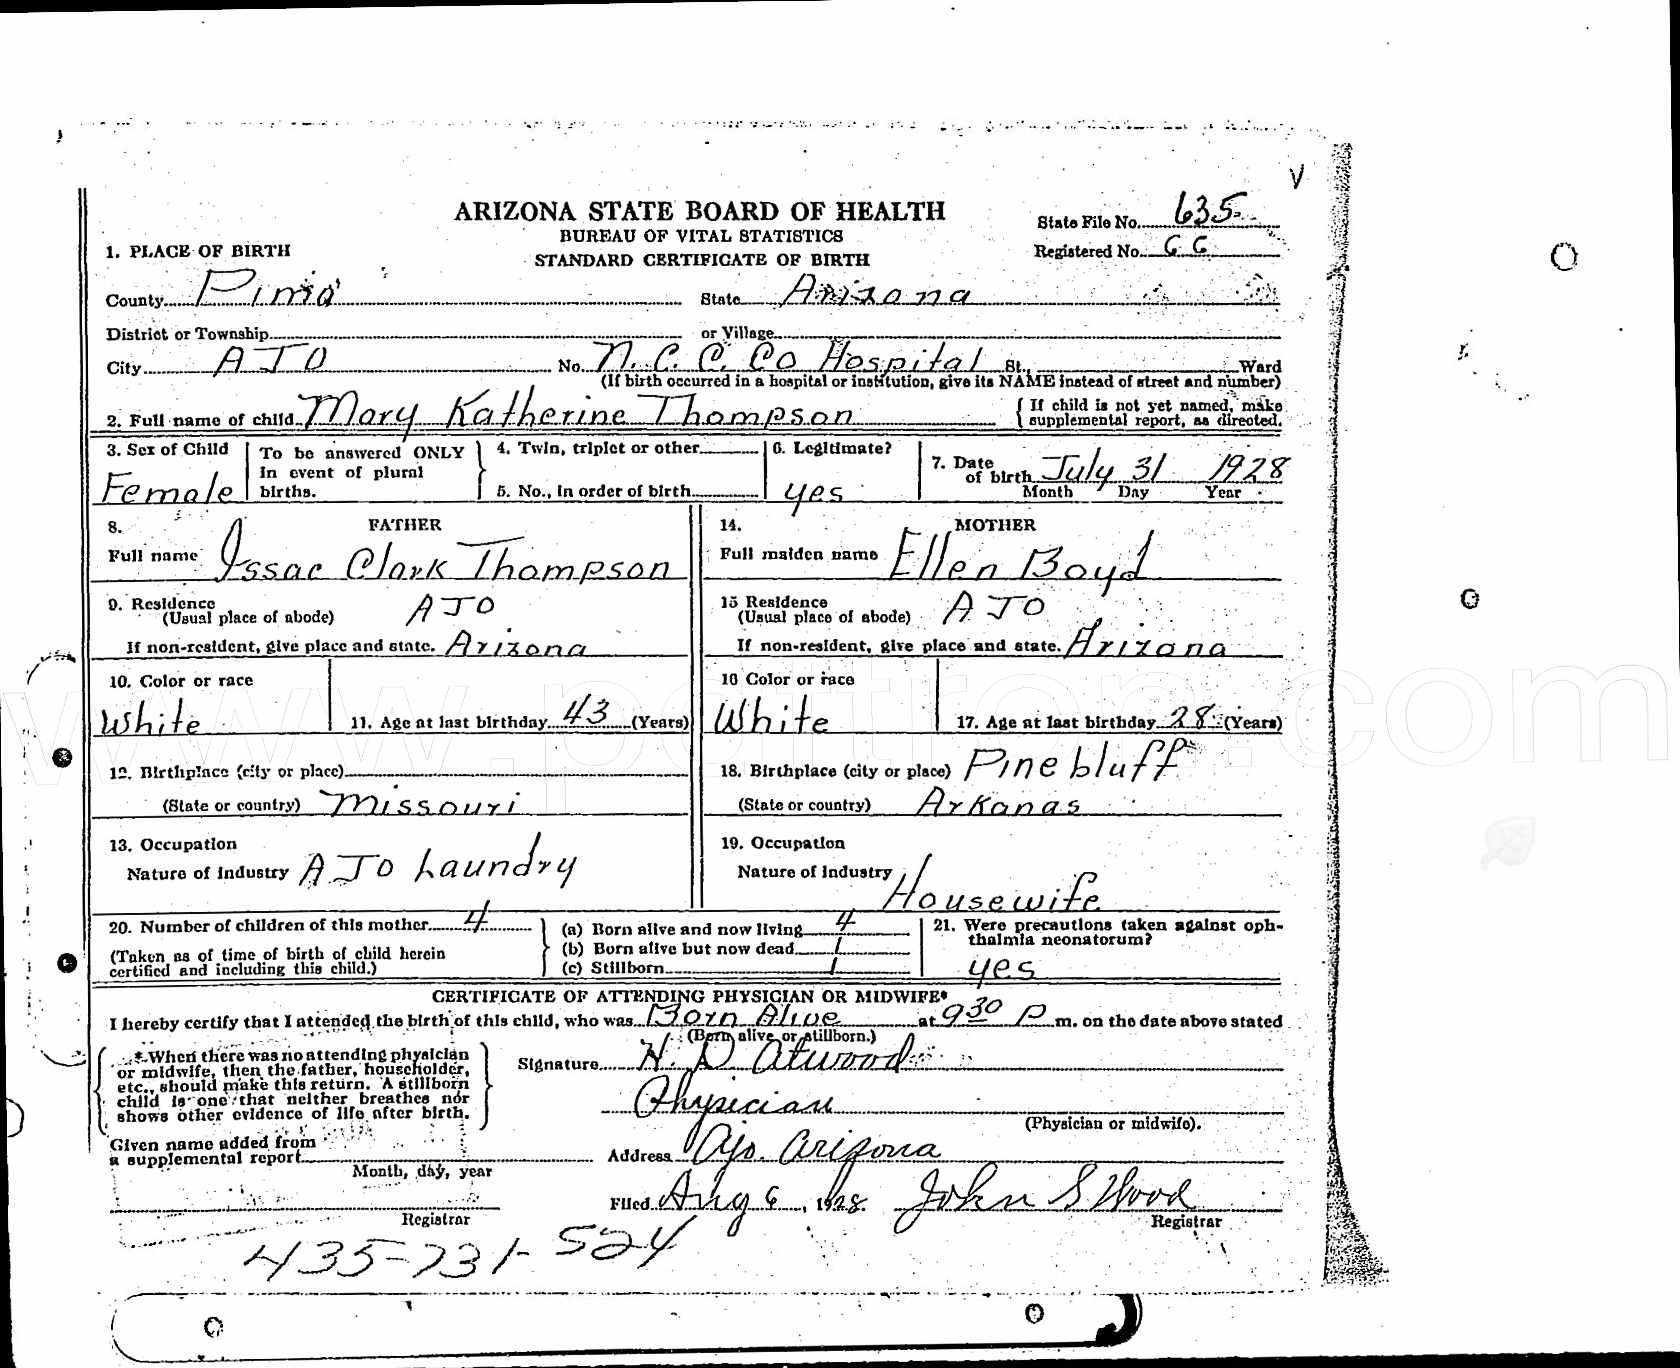 Birth certificate of Mary Katherine Thompson